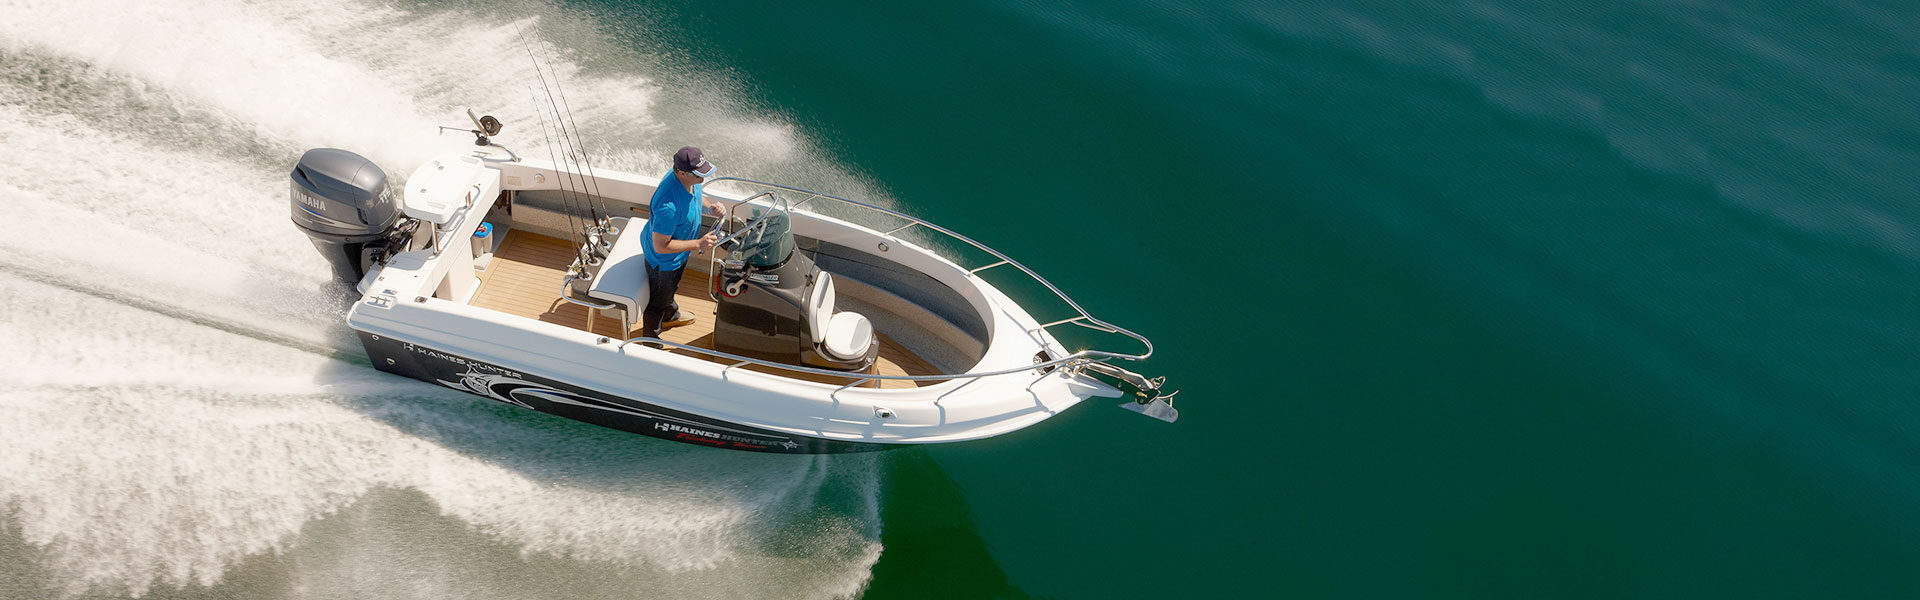 Haines Hunter Wins Trade-a-Boat Magazine’s Best Boat of 2015